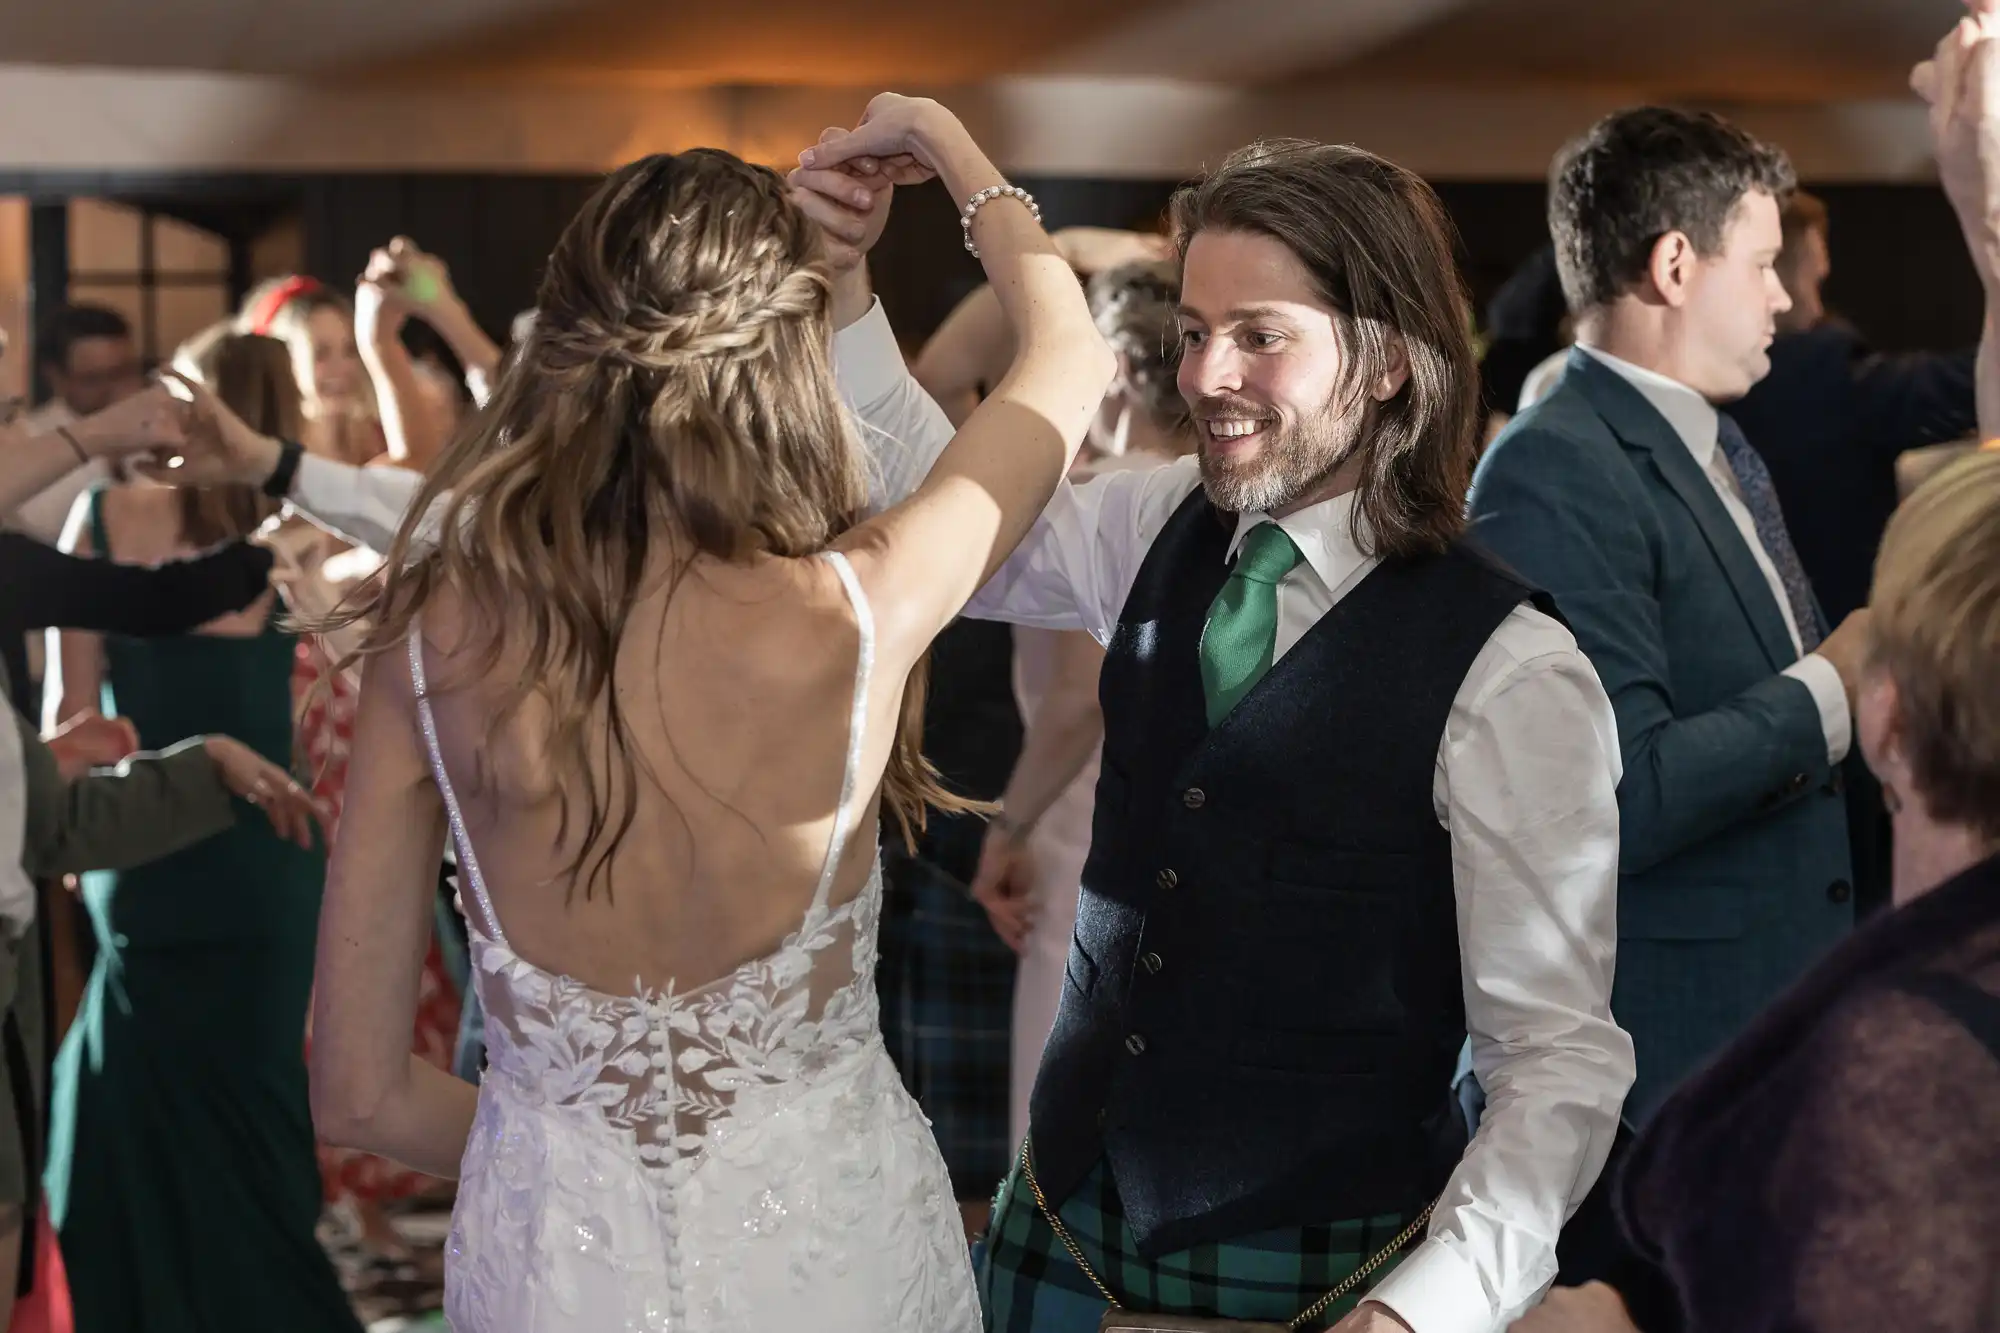 A couple dances, with the woman in a white dress and the man in a suit and green tie, surrounded by others also dancing in a warmly lit room.